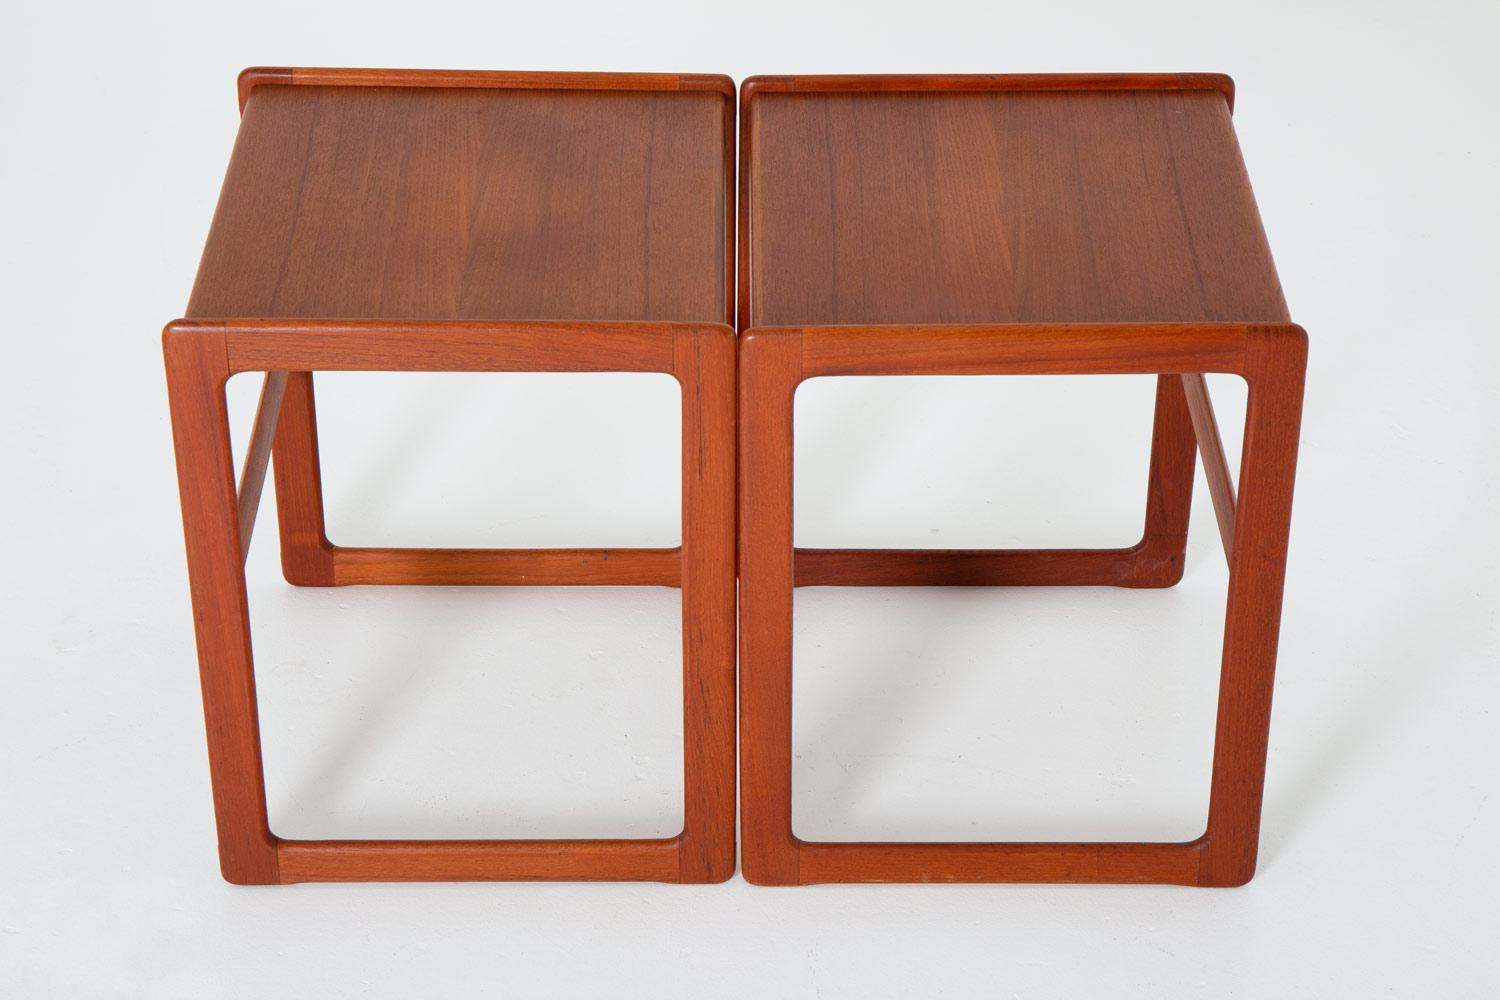 A pair of mid-century side tables or bedside tables in teak manufactured in Denmark, 1950s.
These high-quality side tables have a minimalistic design with beautiful details. 

Condition: Very good original condition.